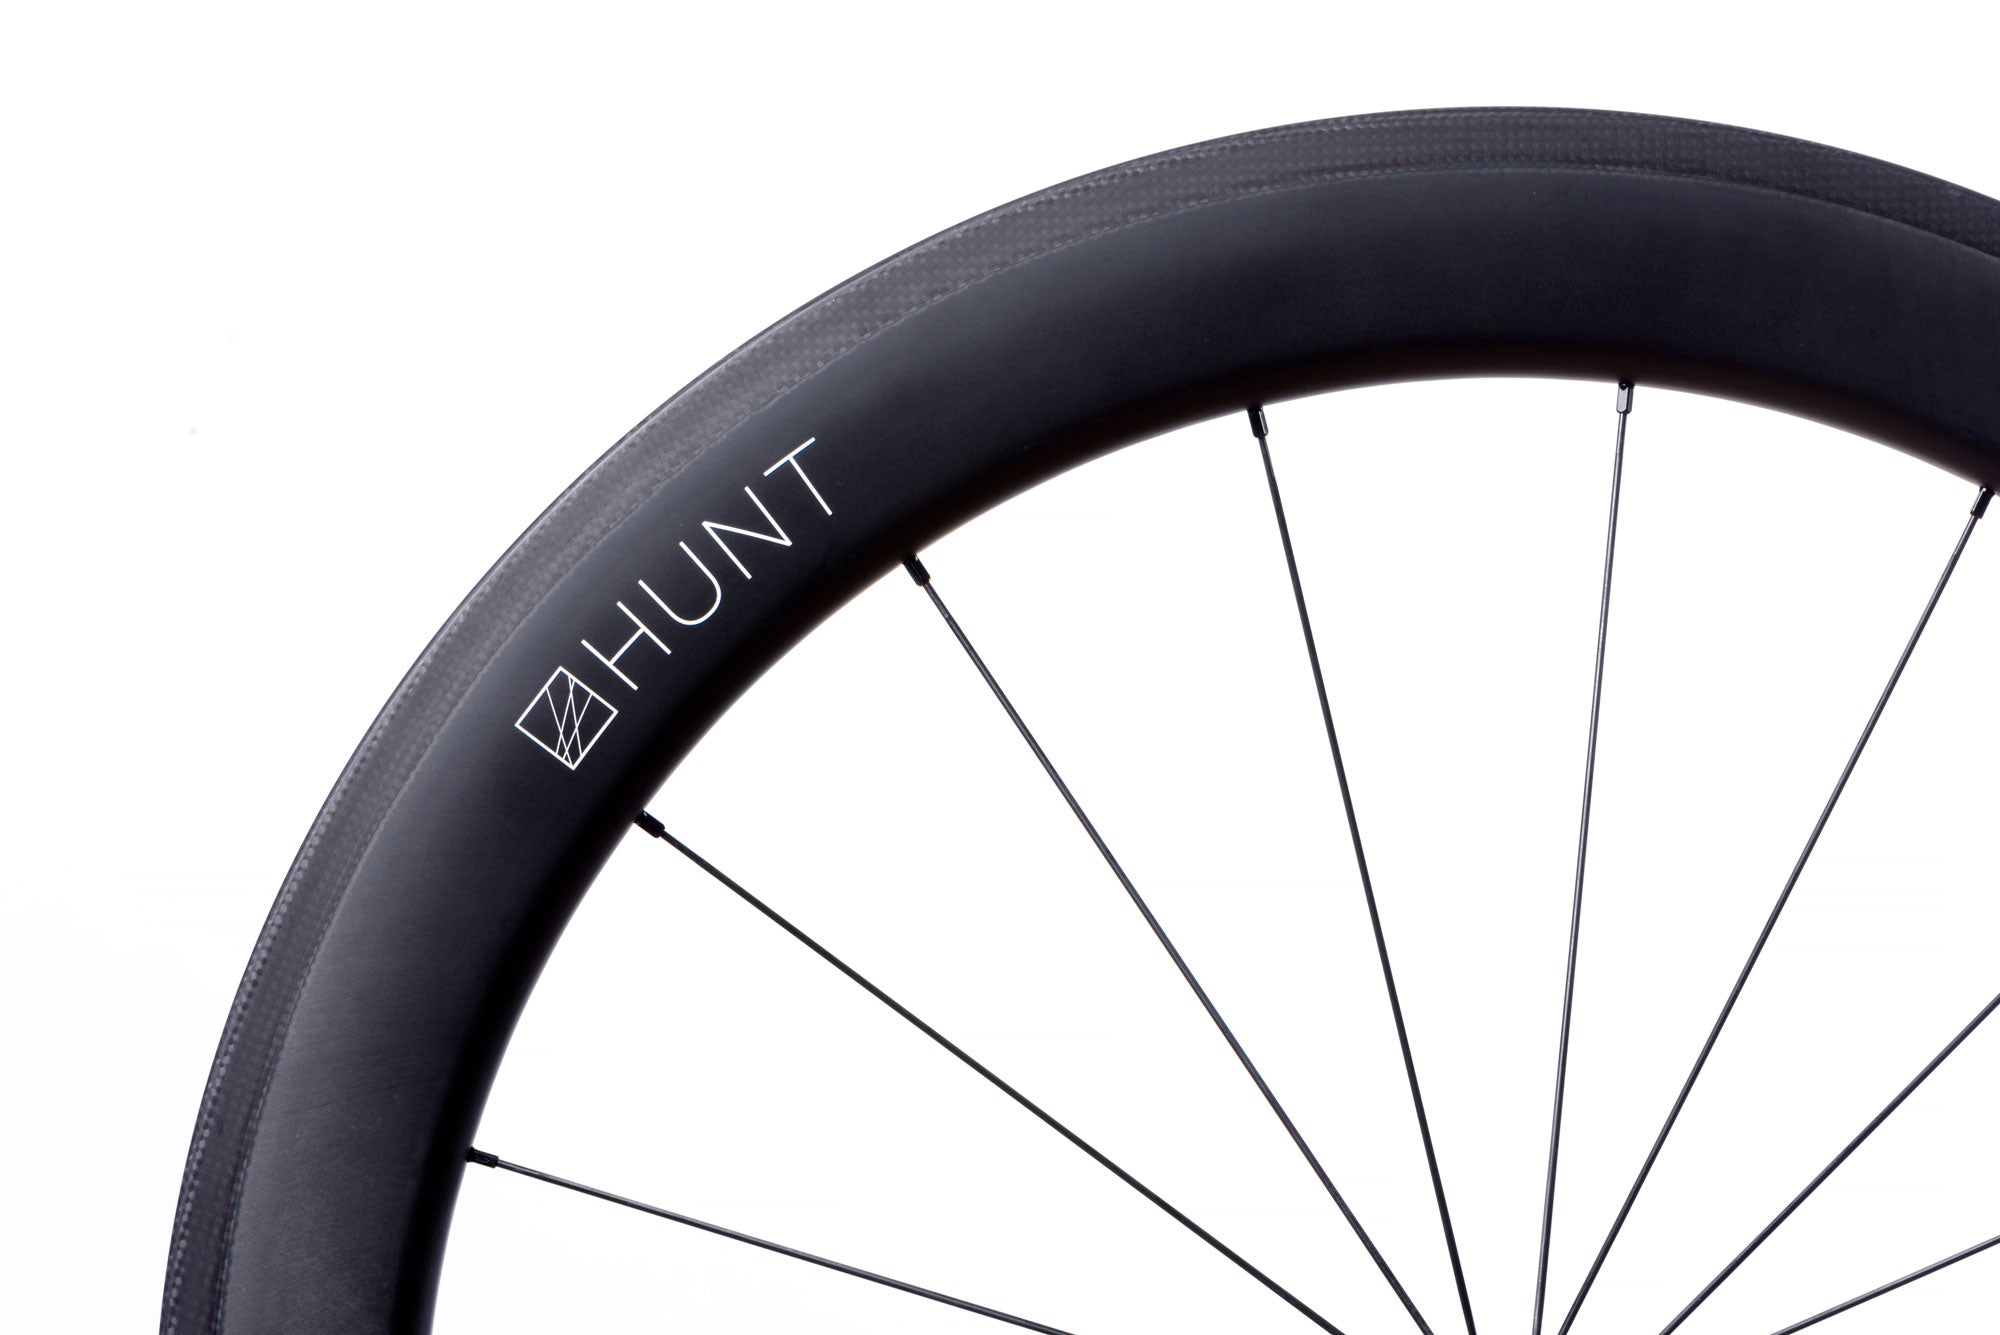 <h1>WING SPOKES</h1><i>After considerable testing across multiple spoke types (including analysis against competitor spokes), we found that the aerofoil profile of Pillar’s Wing 20 spokes offer even further aerodynamic advantages over flat/bladed options.</i>